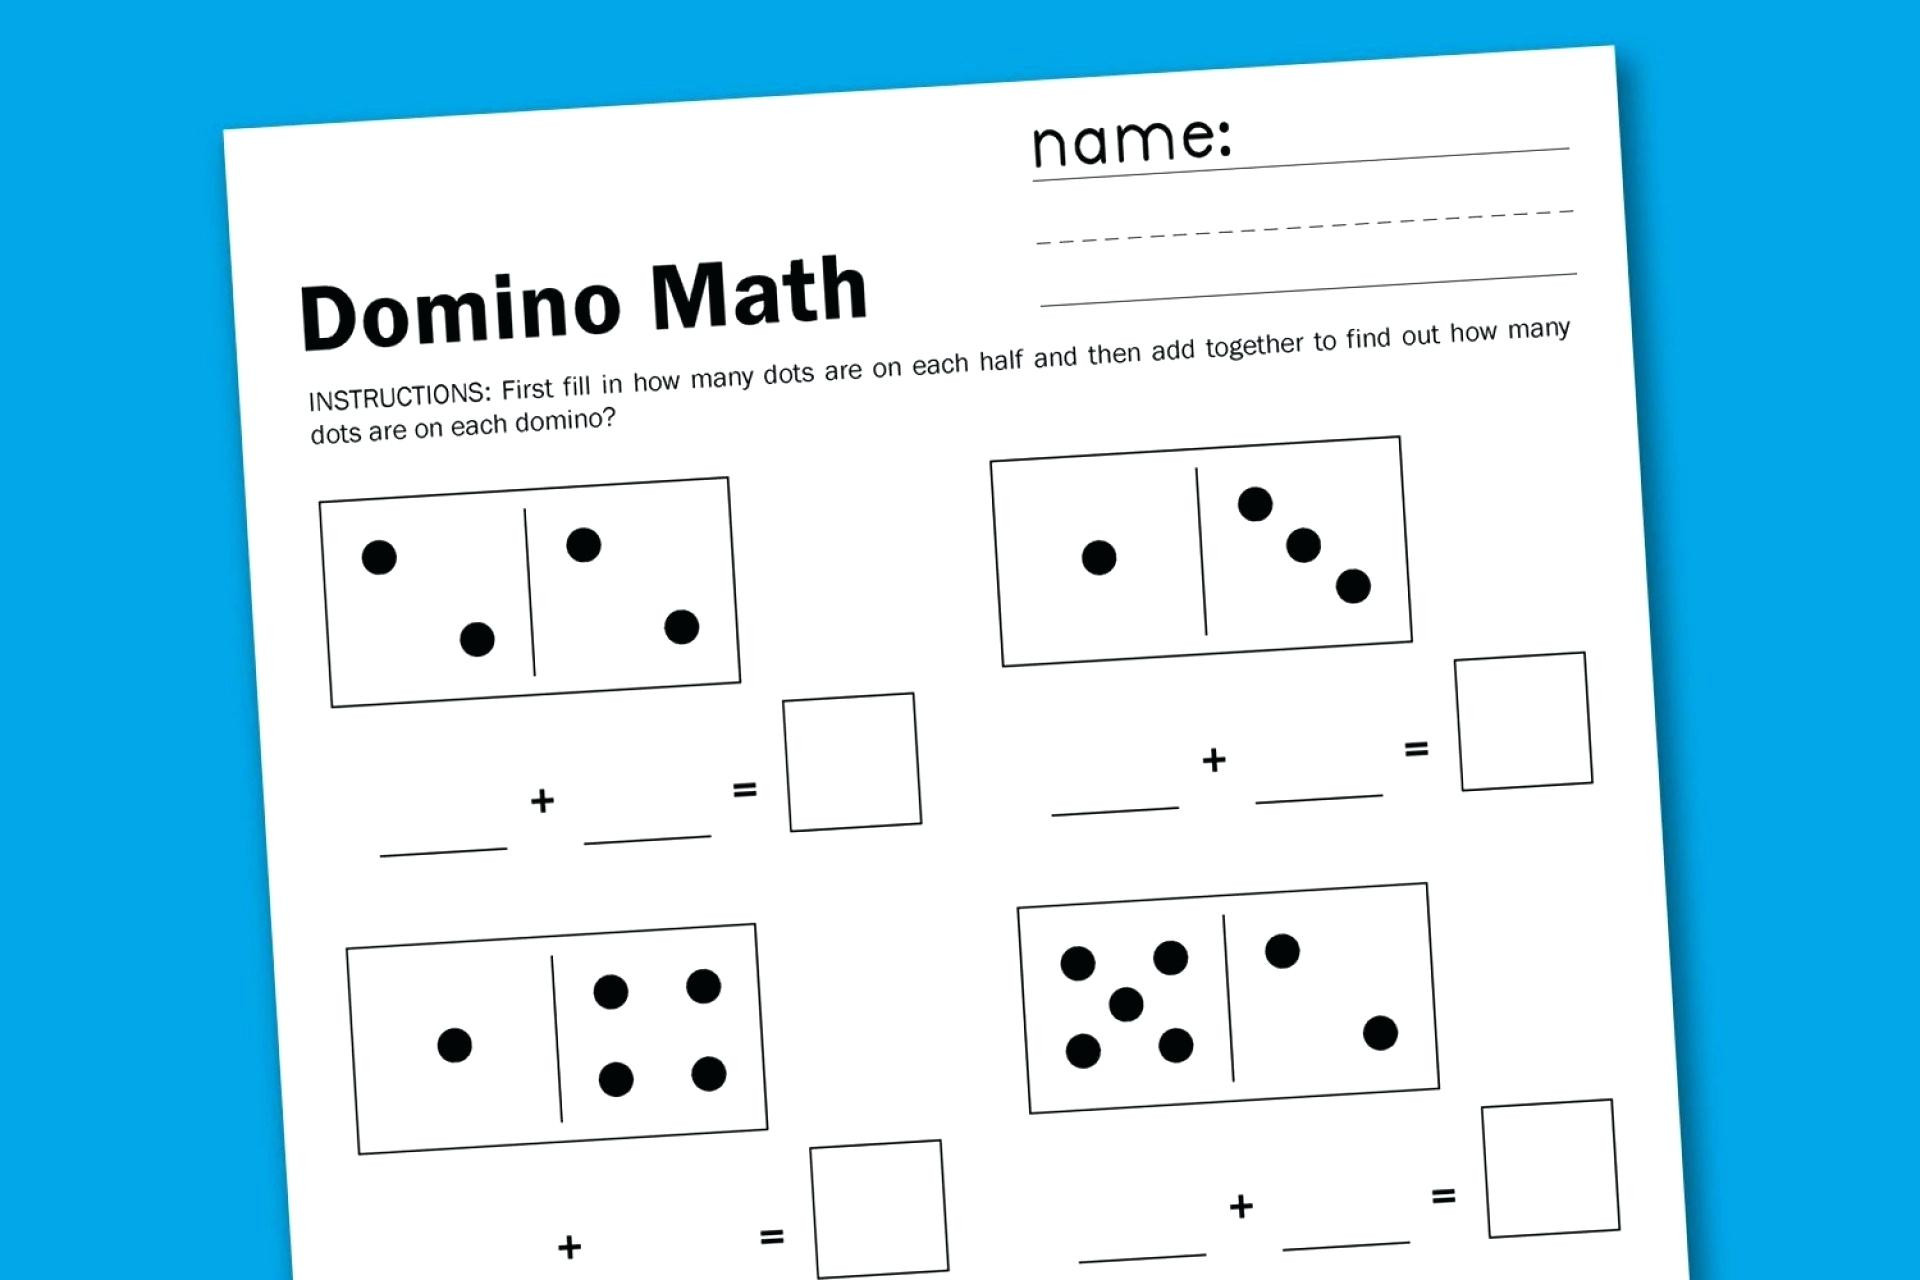 Free Math Worksheets First Grade 1 Addition Number Lines